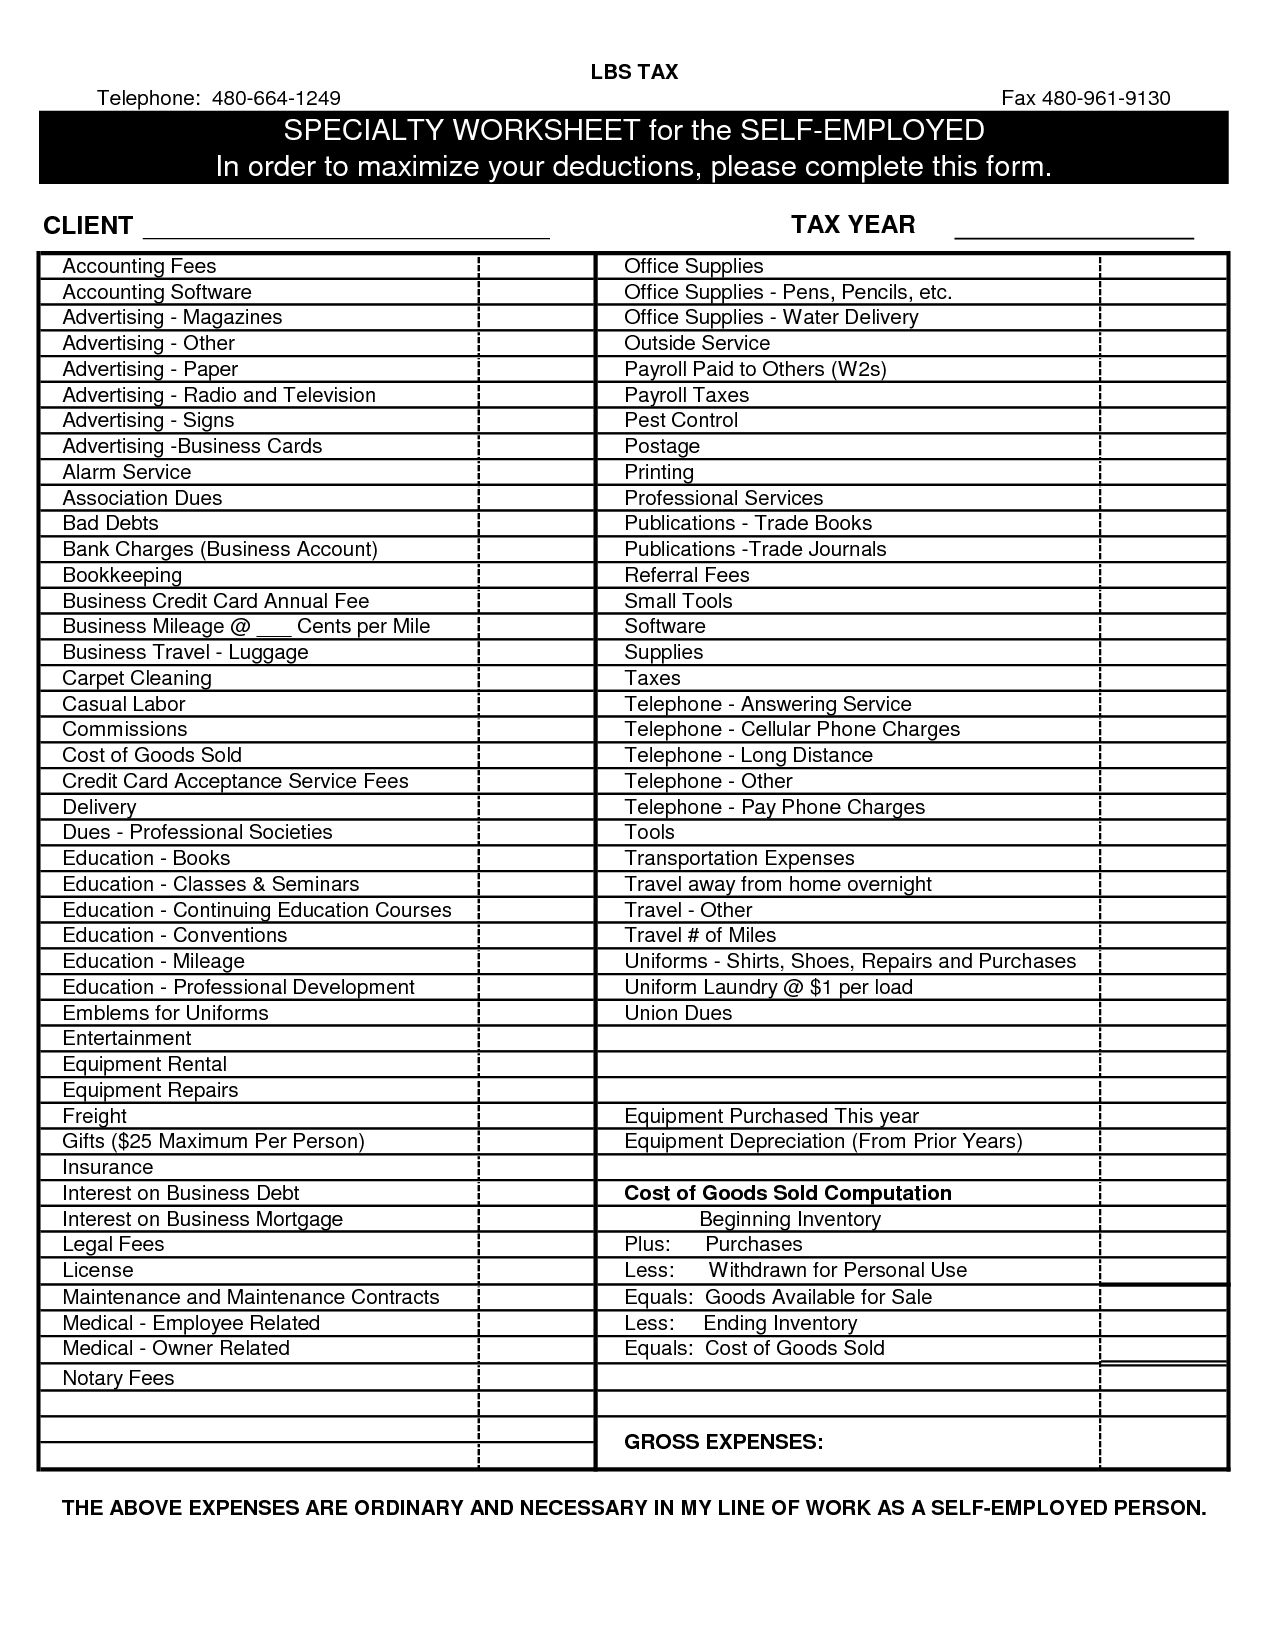 2017 Qualified Dividends And Capital Gain Tax Worksheet